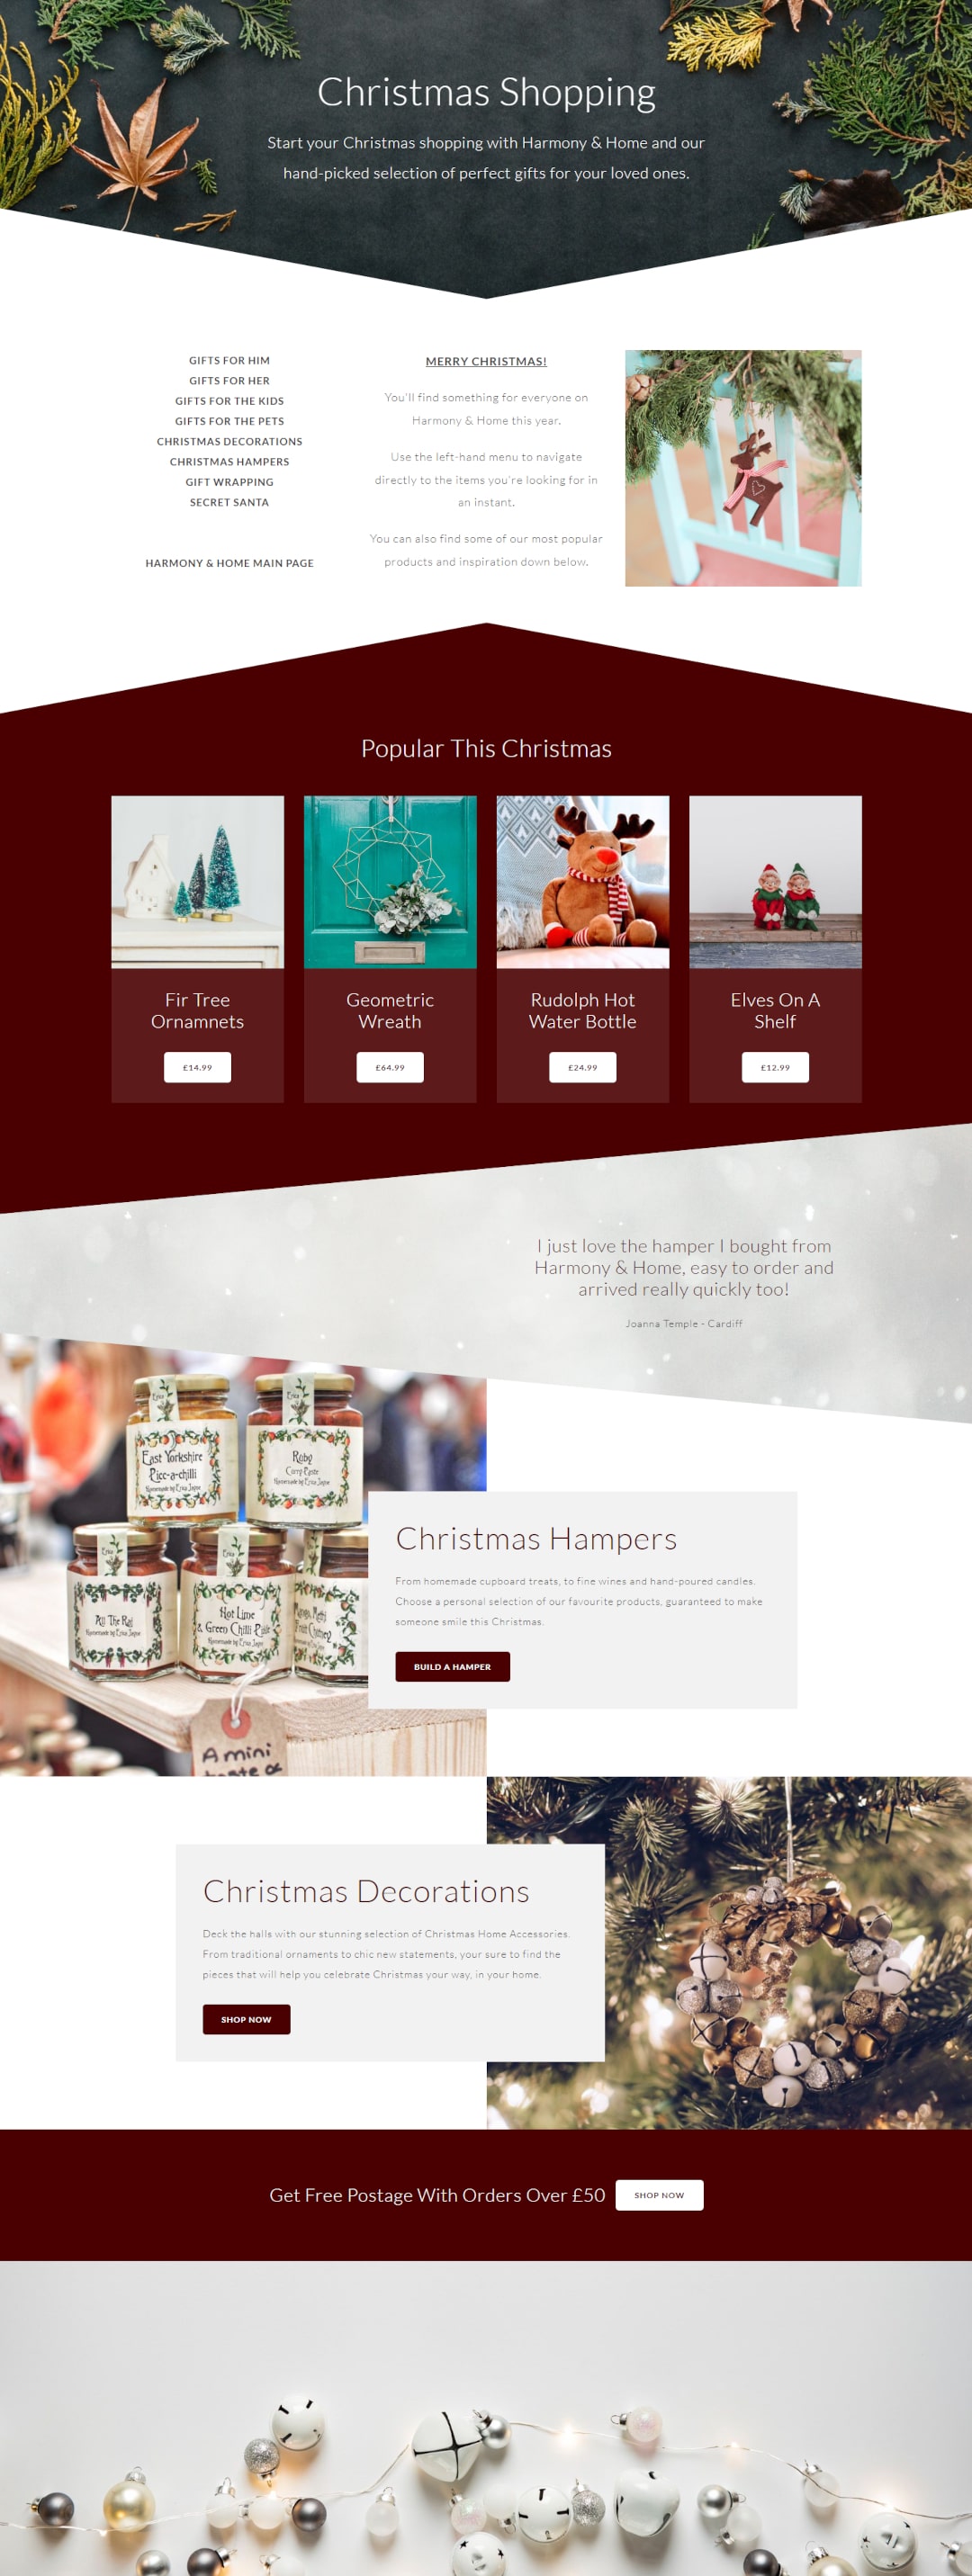 A landing page dedicated to promoting Christmas products and offers